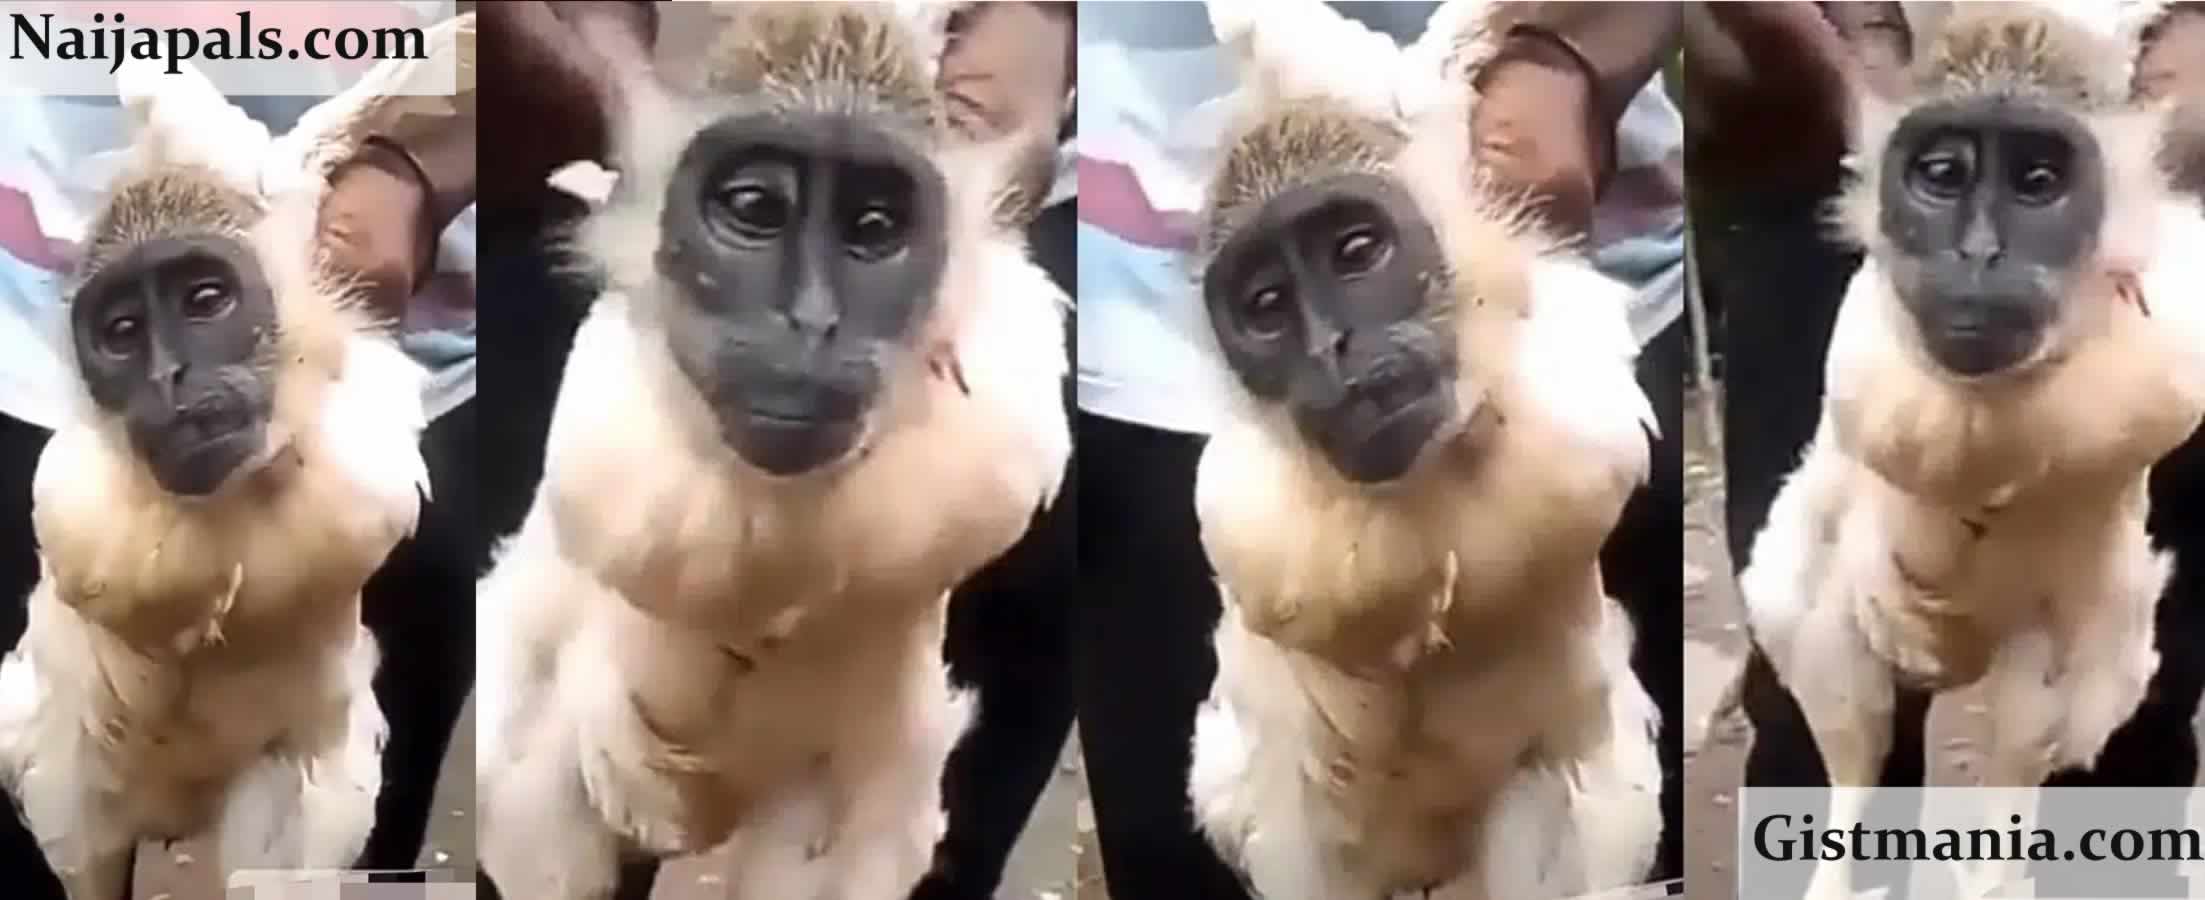 scary looking monkey